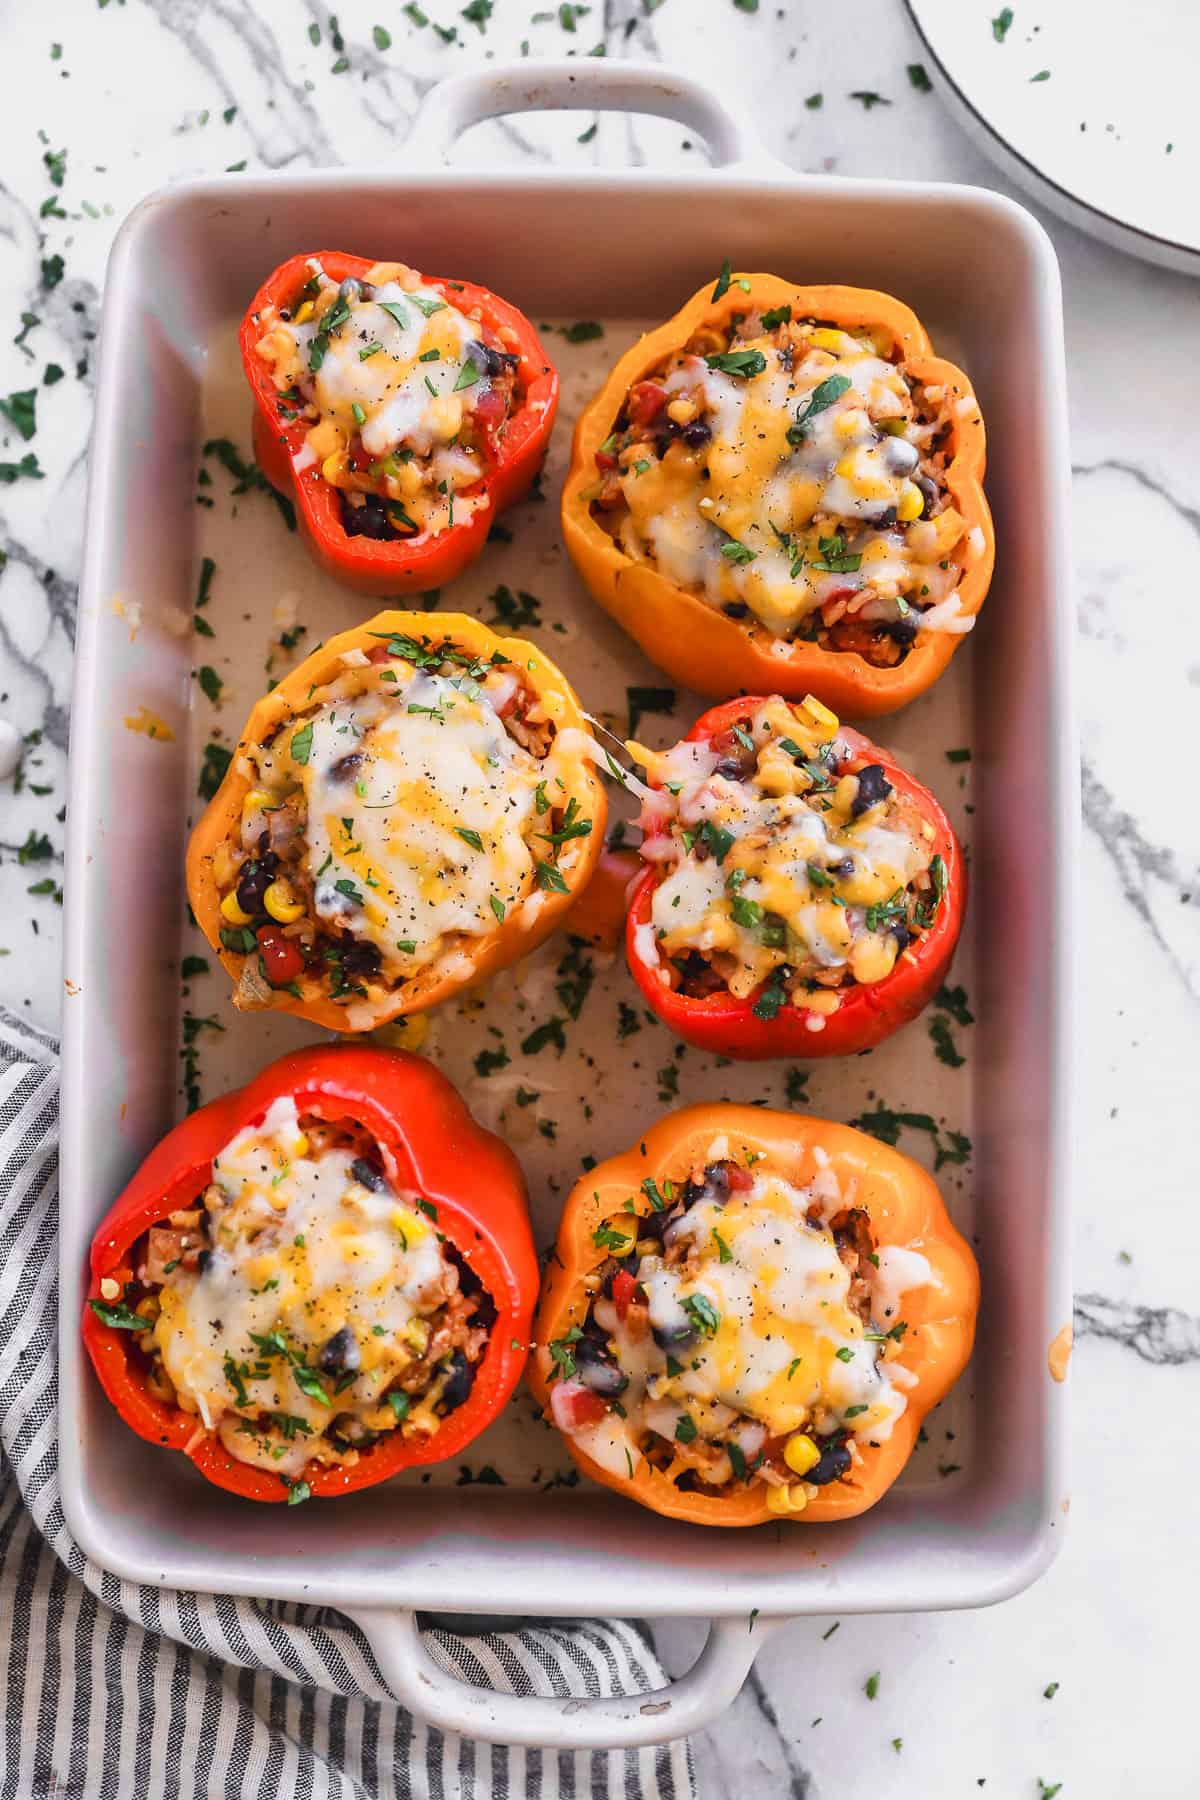 Six homemade vegetarian stuffed peppers with rice, beans, veggies, and topped with cheese. They are out of the oven and ready to eat.